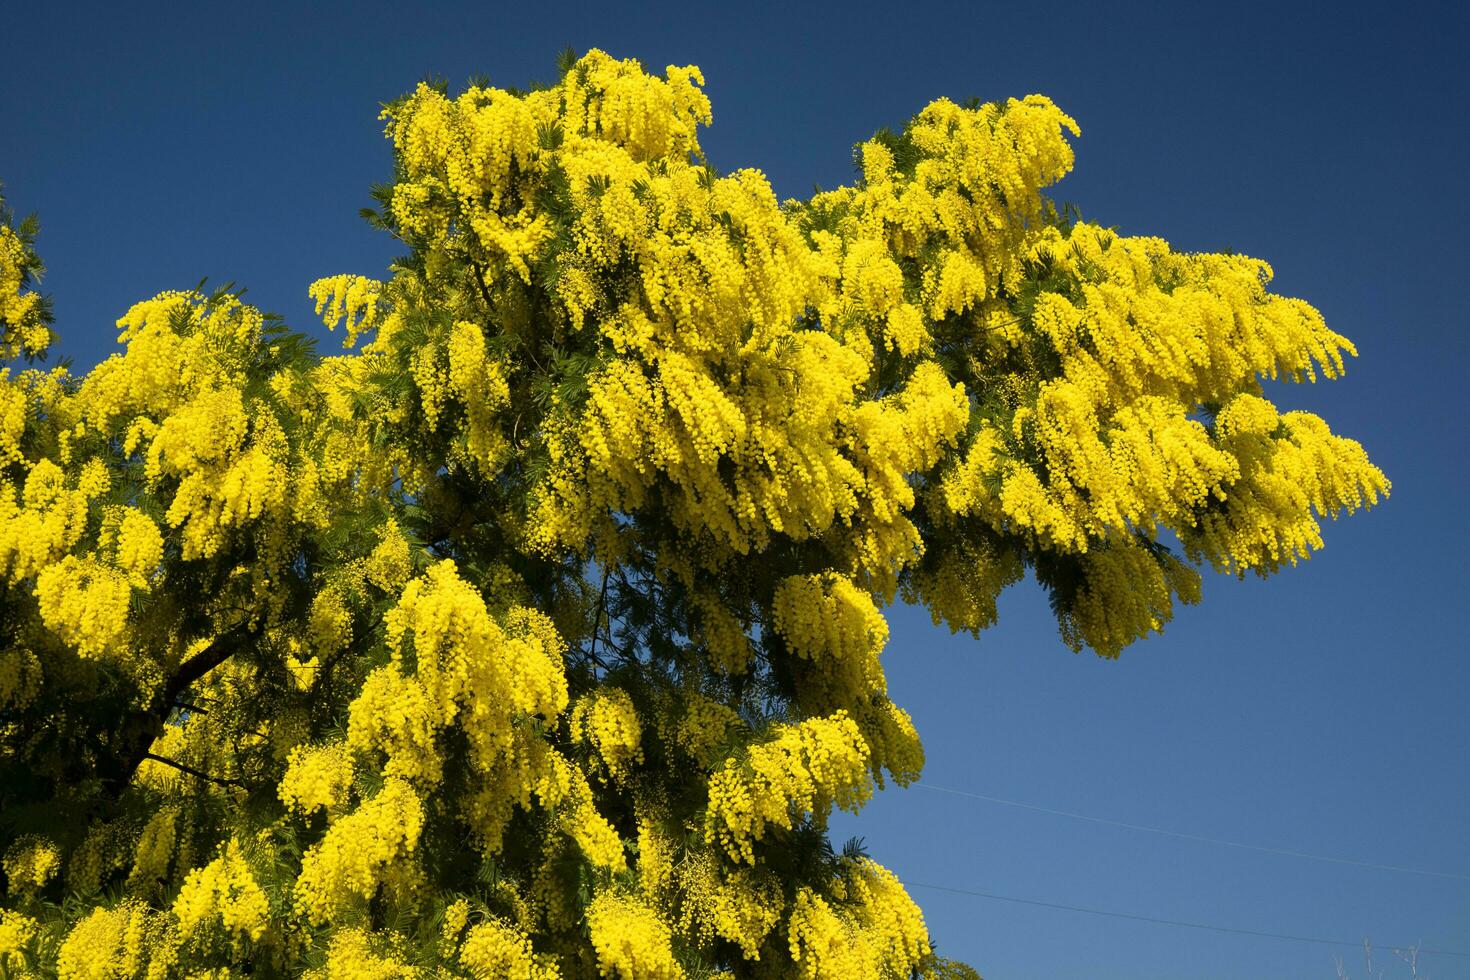 The yellow flower of Mimosa photo